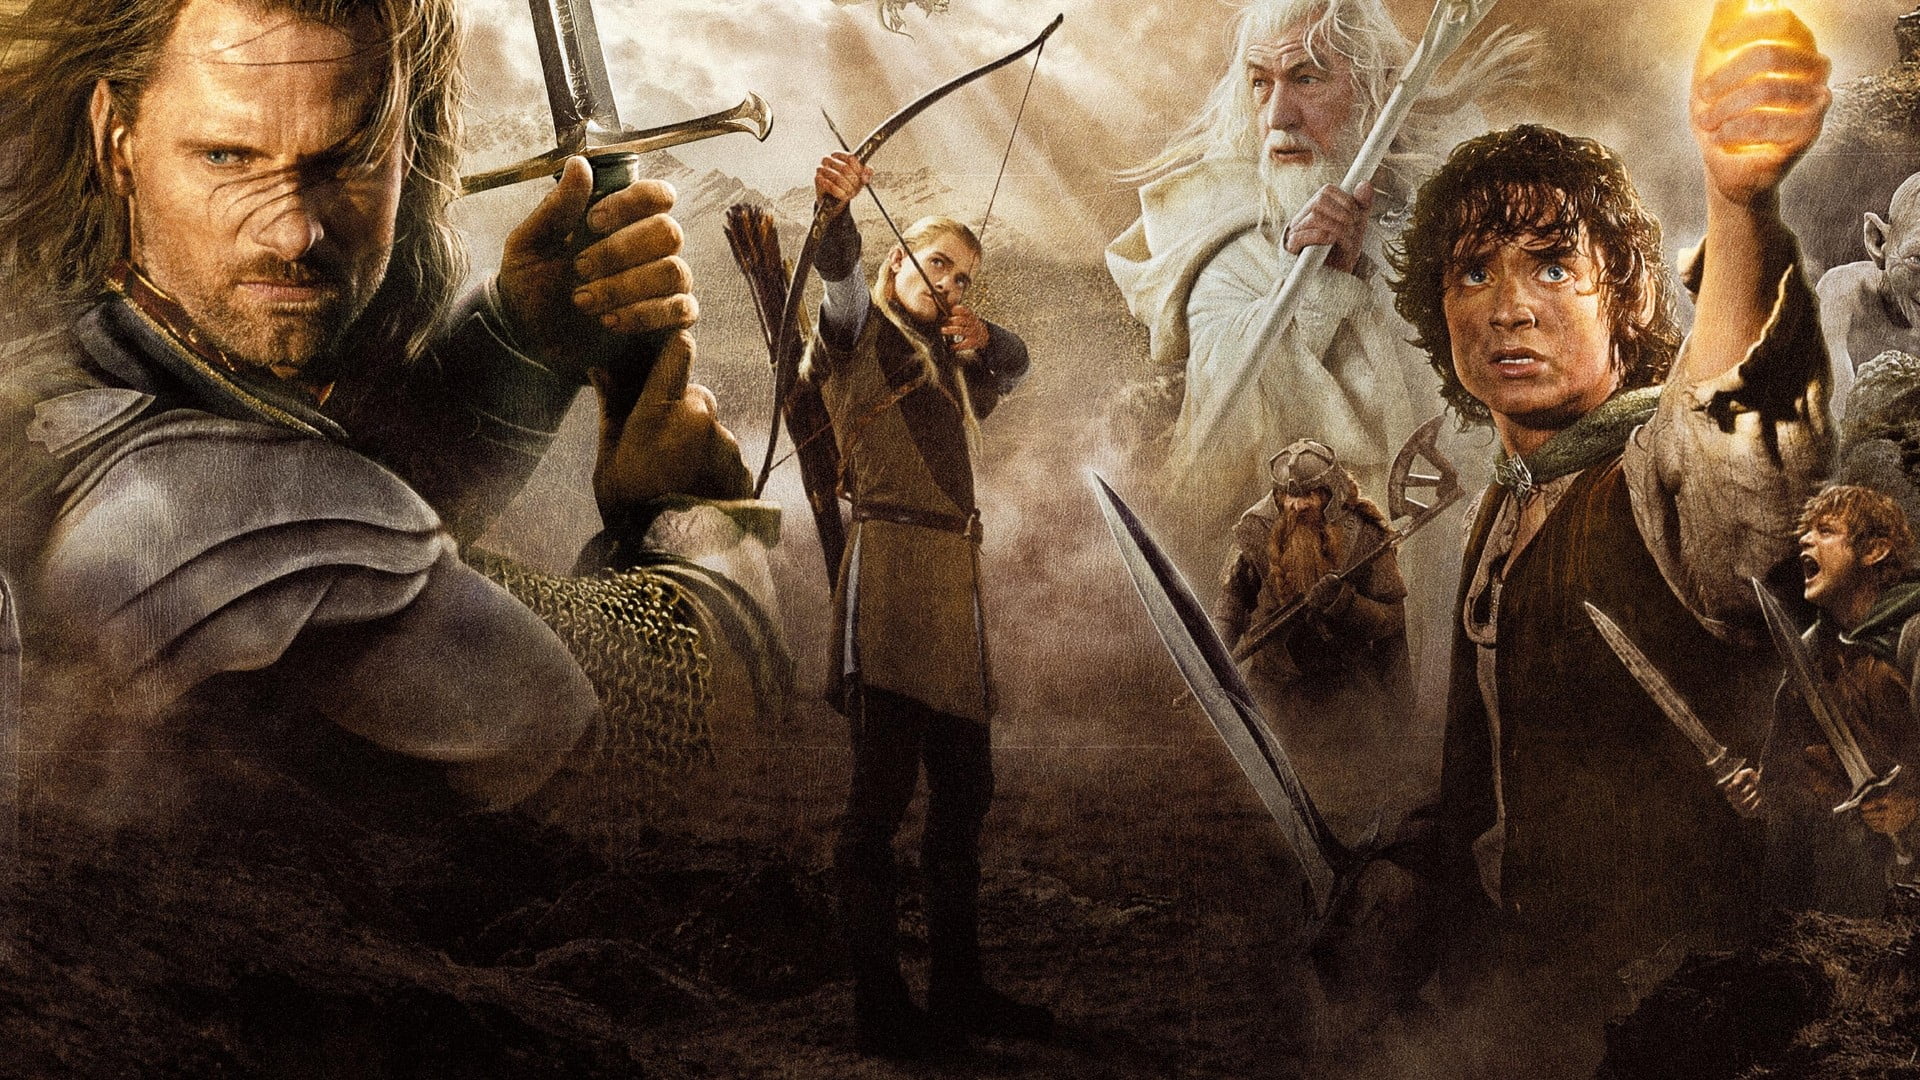 Lord of the Rings movie poster, movies, The Lord of the Rings, The Lord